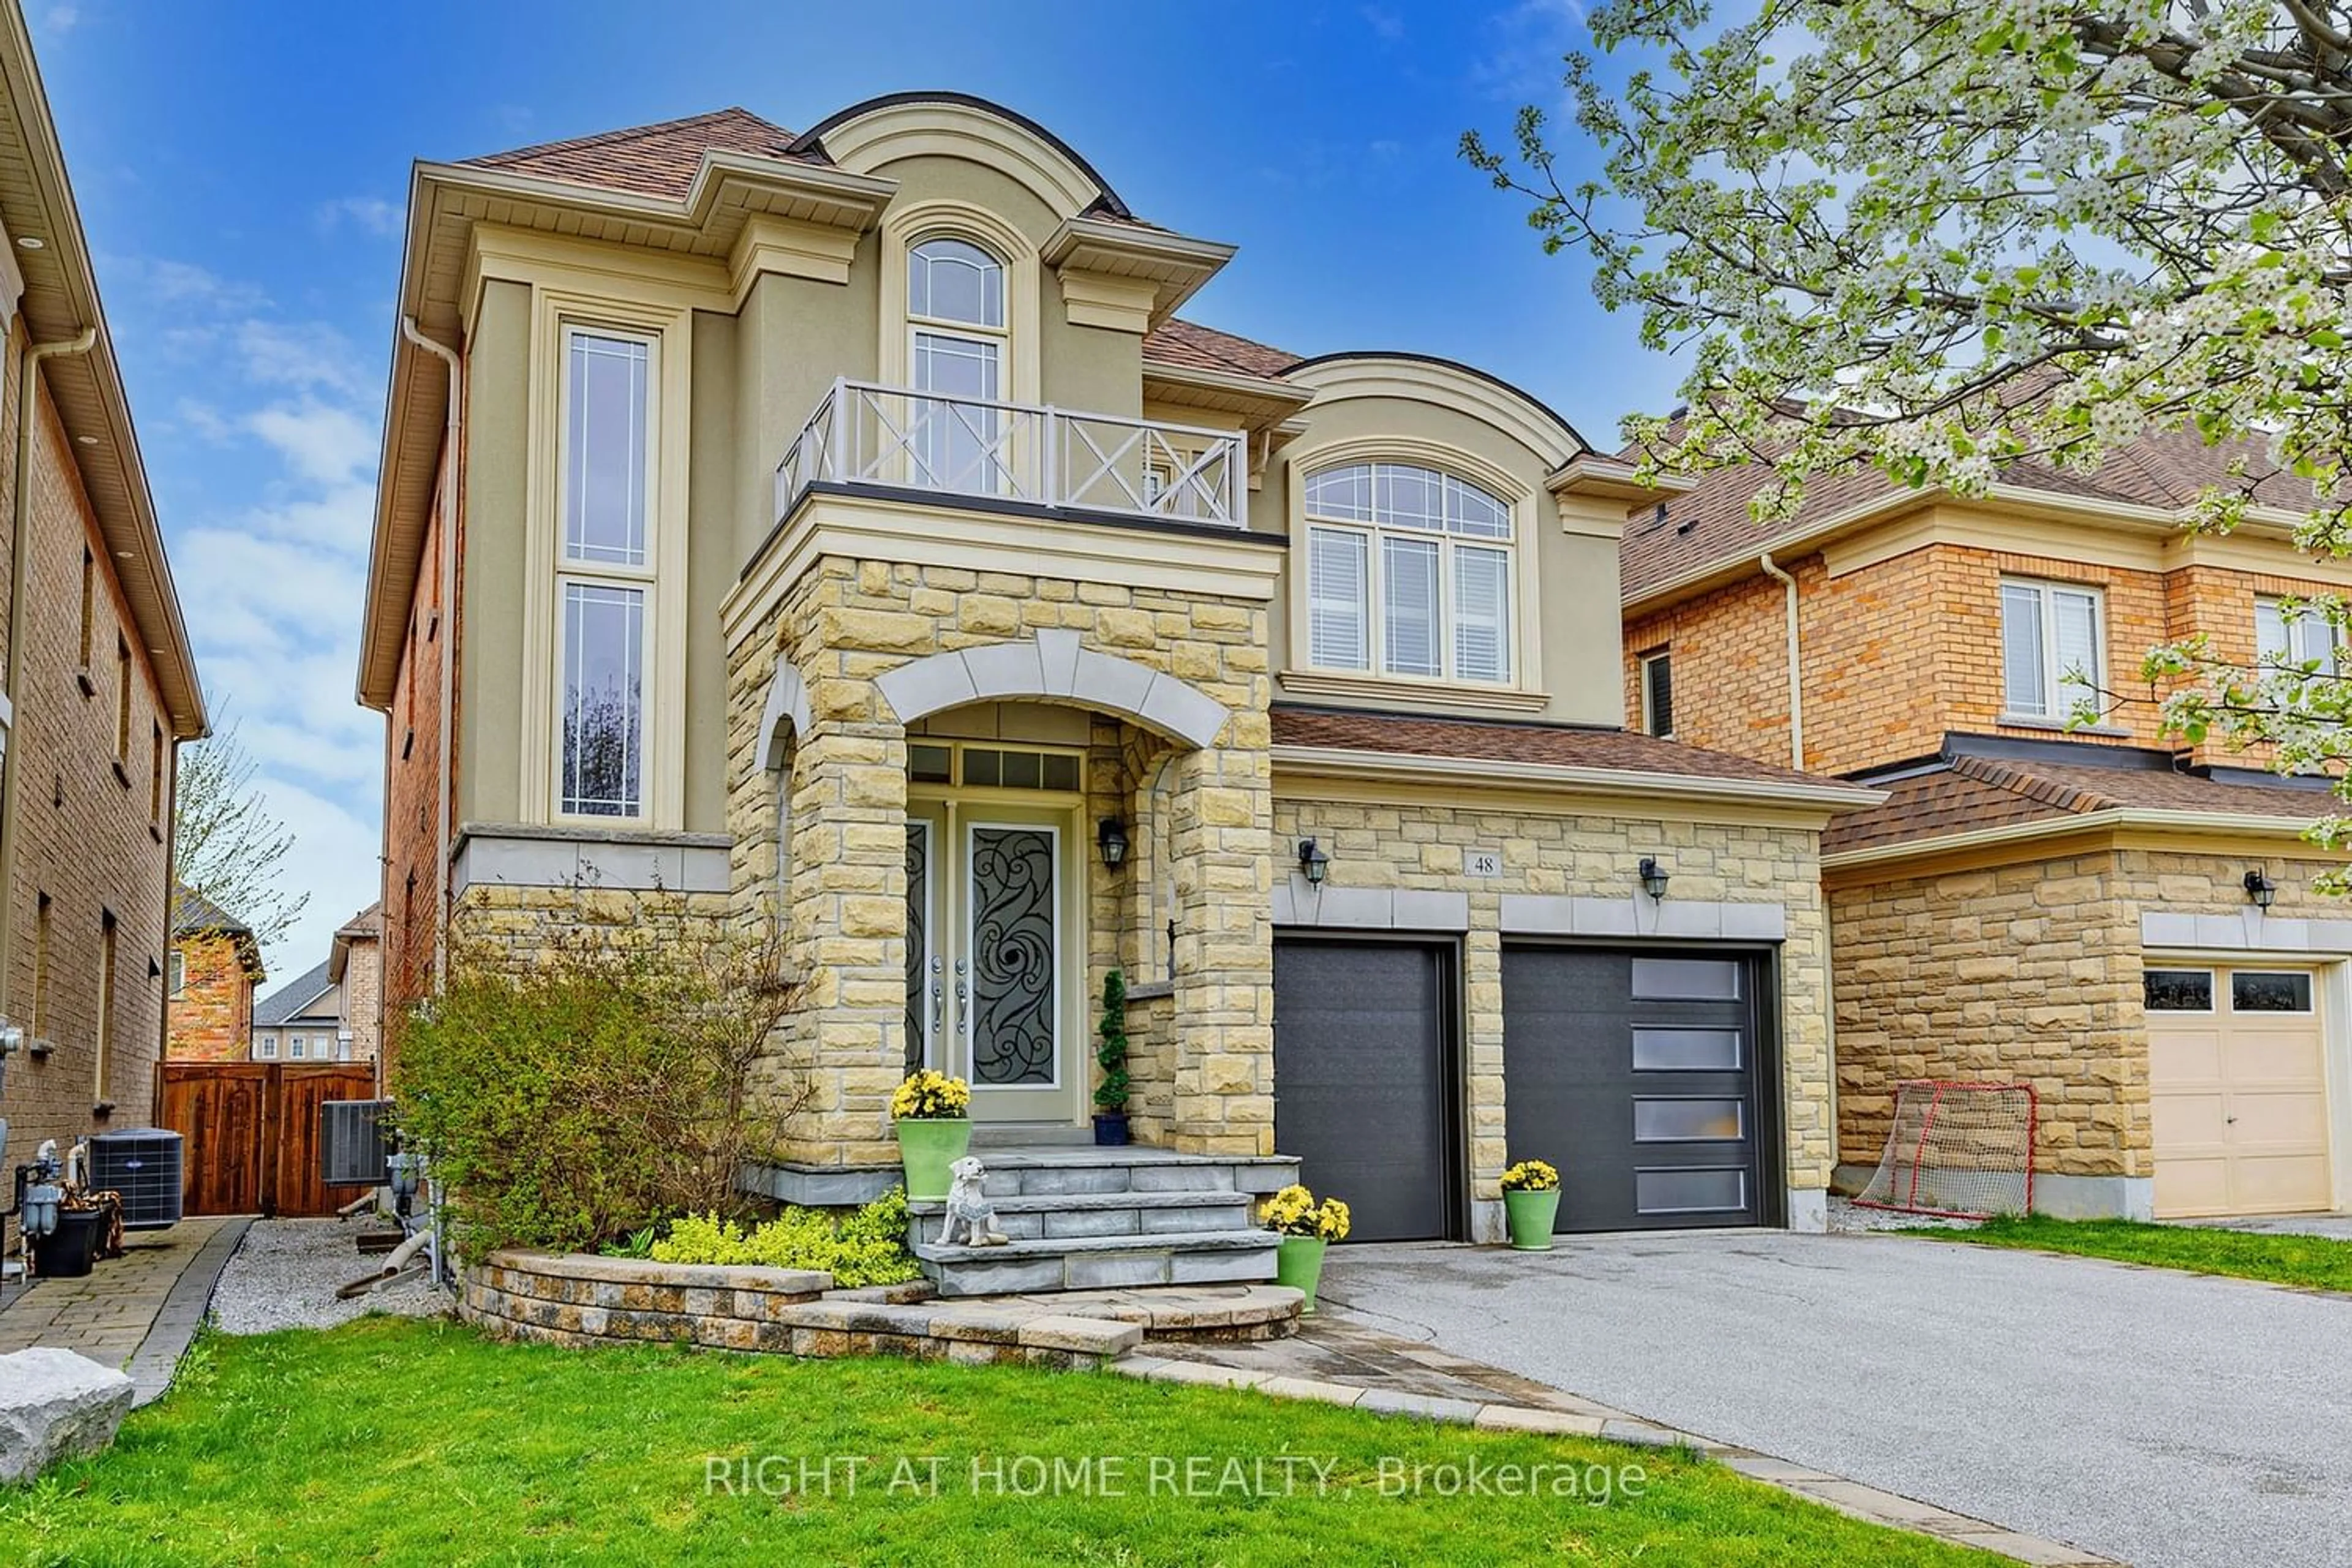 Home with brick exterior material for 48 Headwind Blvd, Vaughan Ontario L4H 3R9